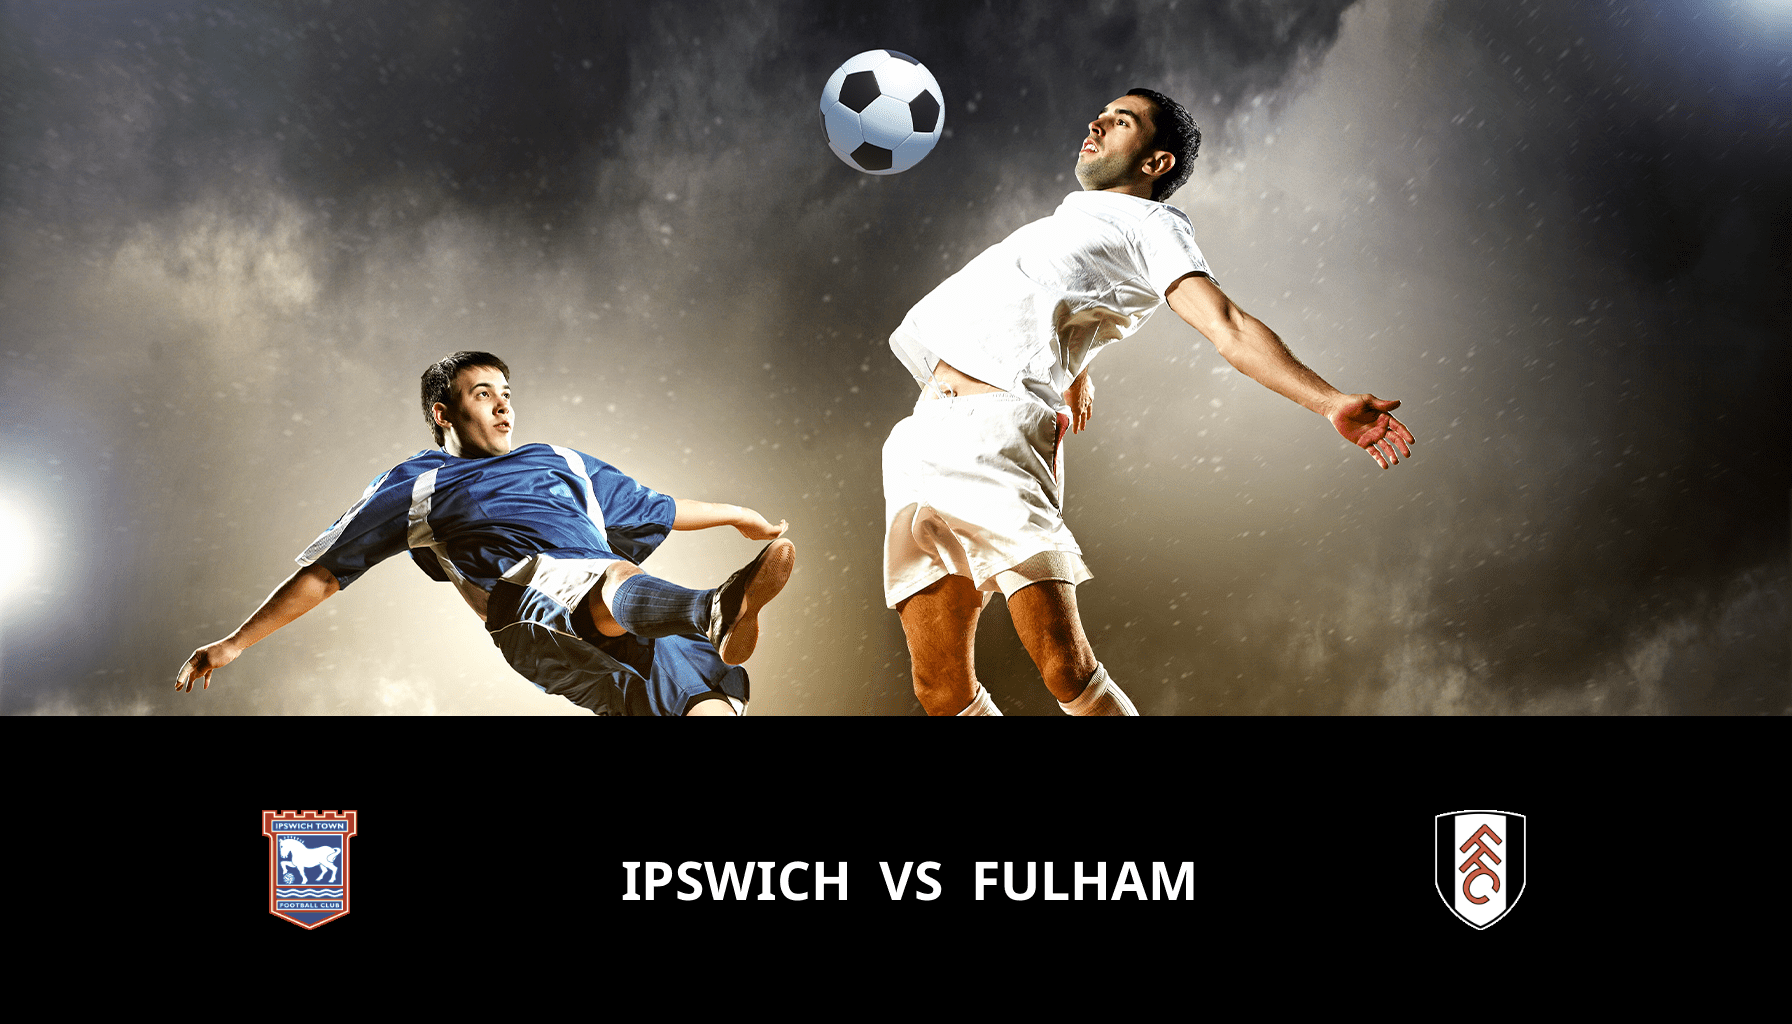 Previsione per Ipswich VS Fulham il 01/11/2023 Analysis of the match